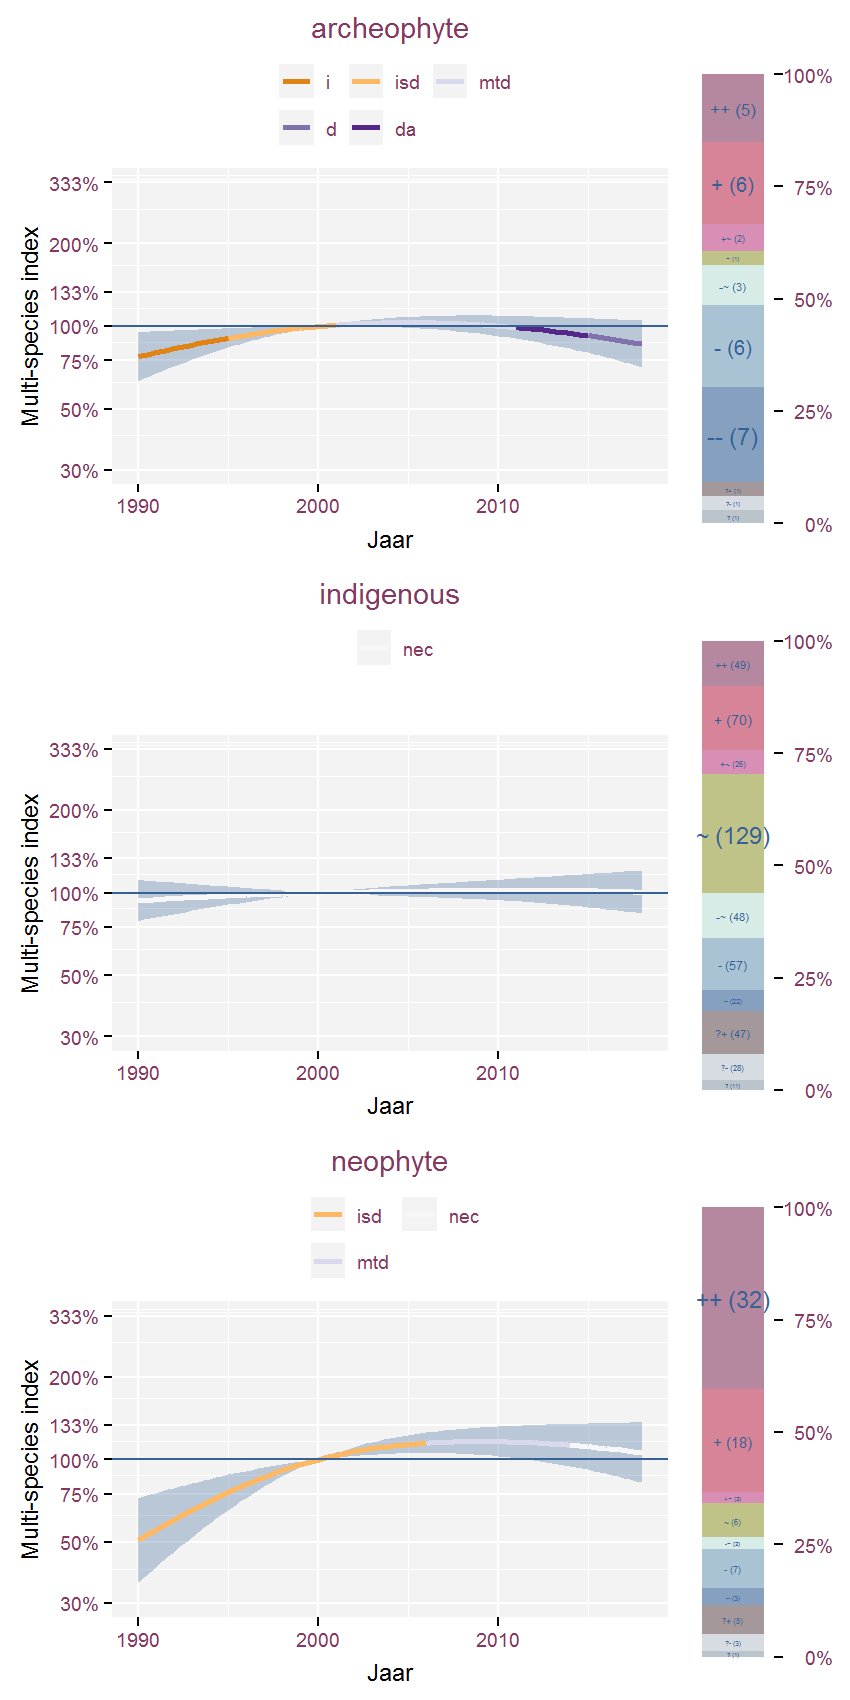 Multi-species index for species groups determined by indigenous, archeophyte or neophyte and period 1990-2018. The index uses 2000 as baseline year.